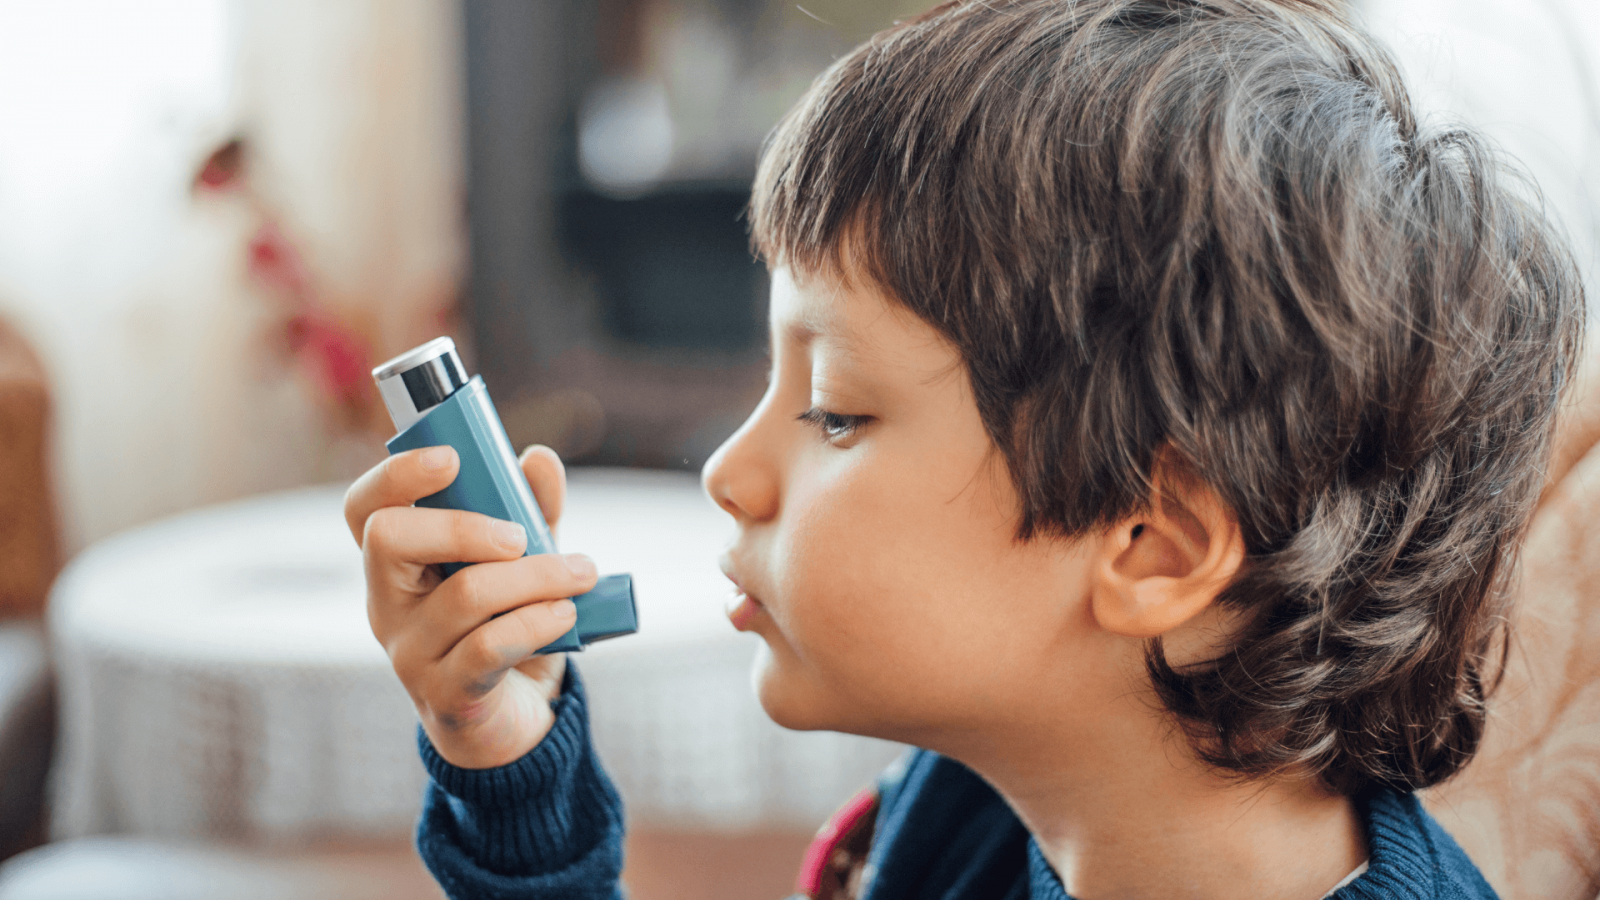 Childhood flu may protect against asthma